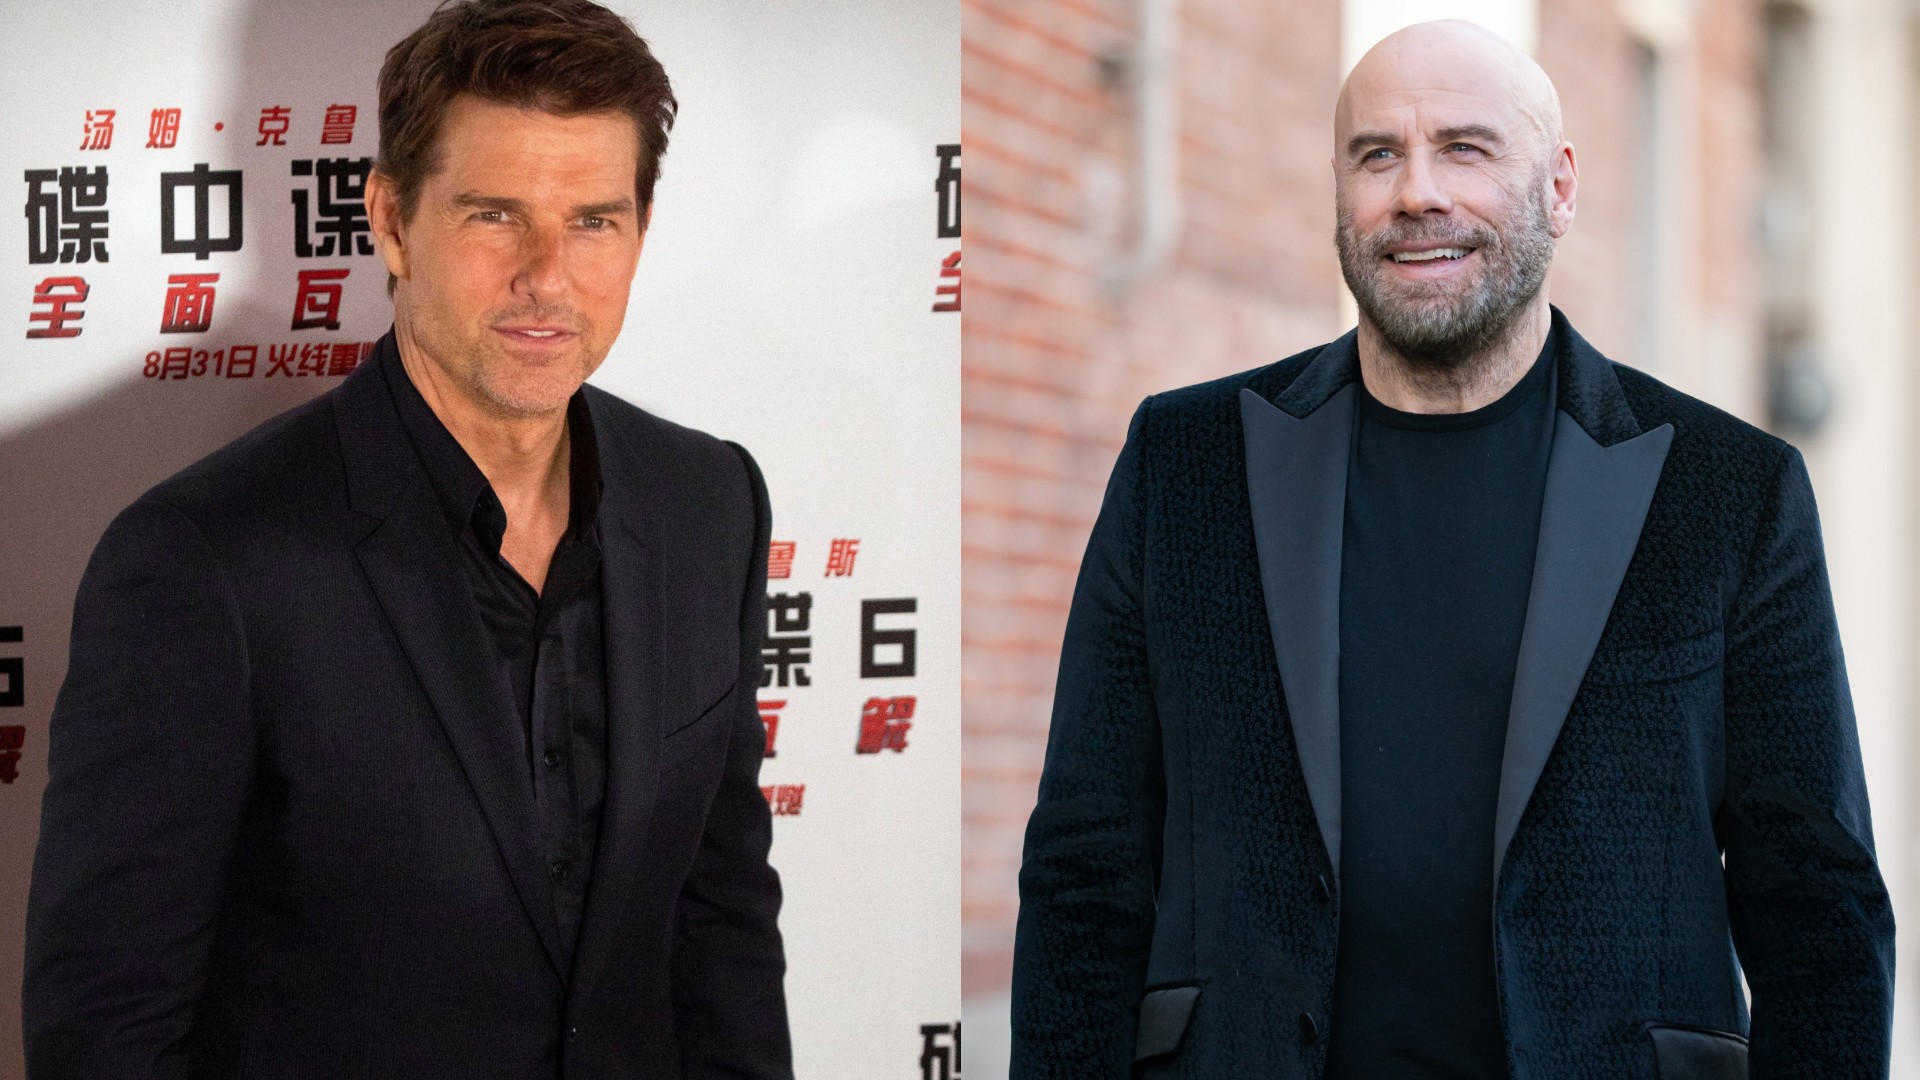 Tom Cruise On A Mission To Save Scientology, Worries John Travolta is Distancing from Church